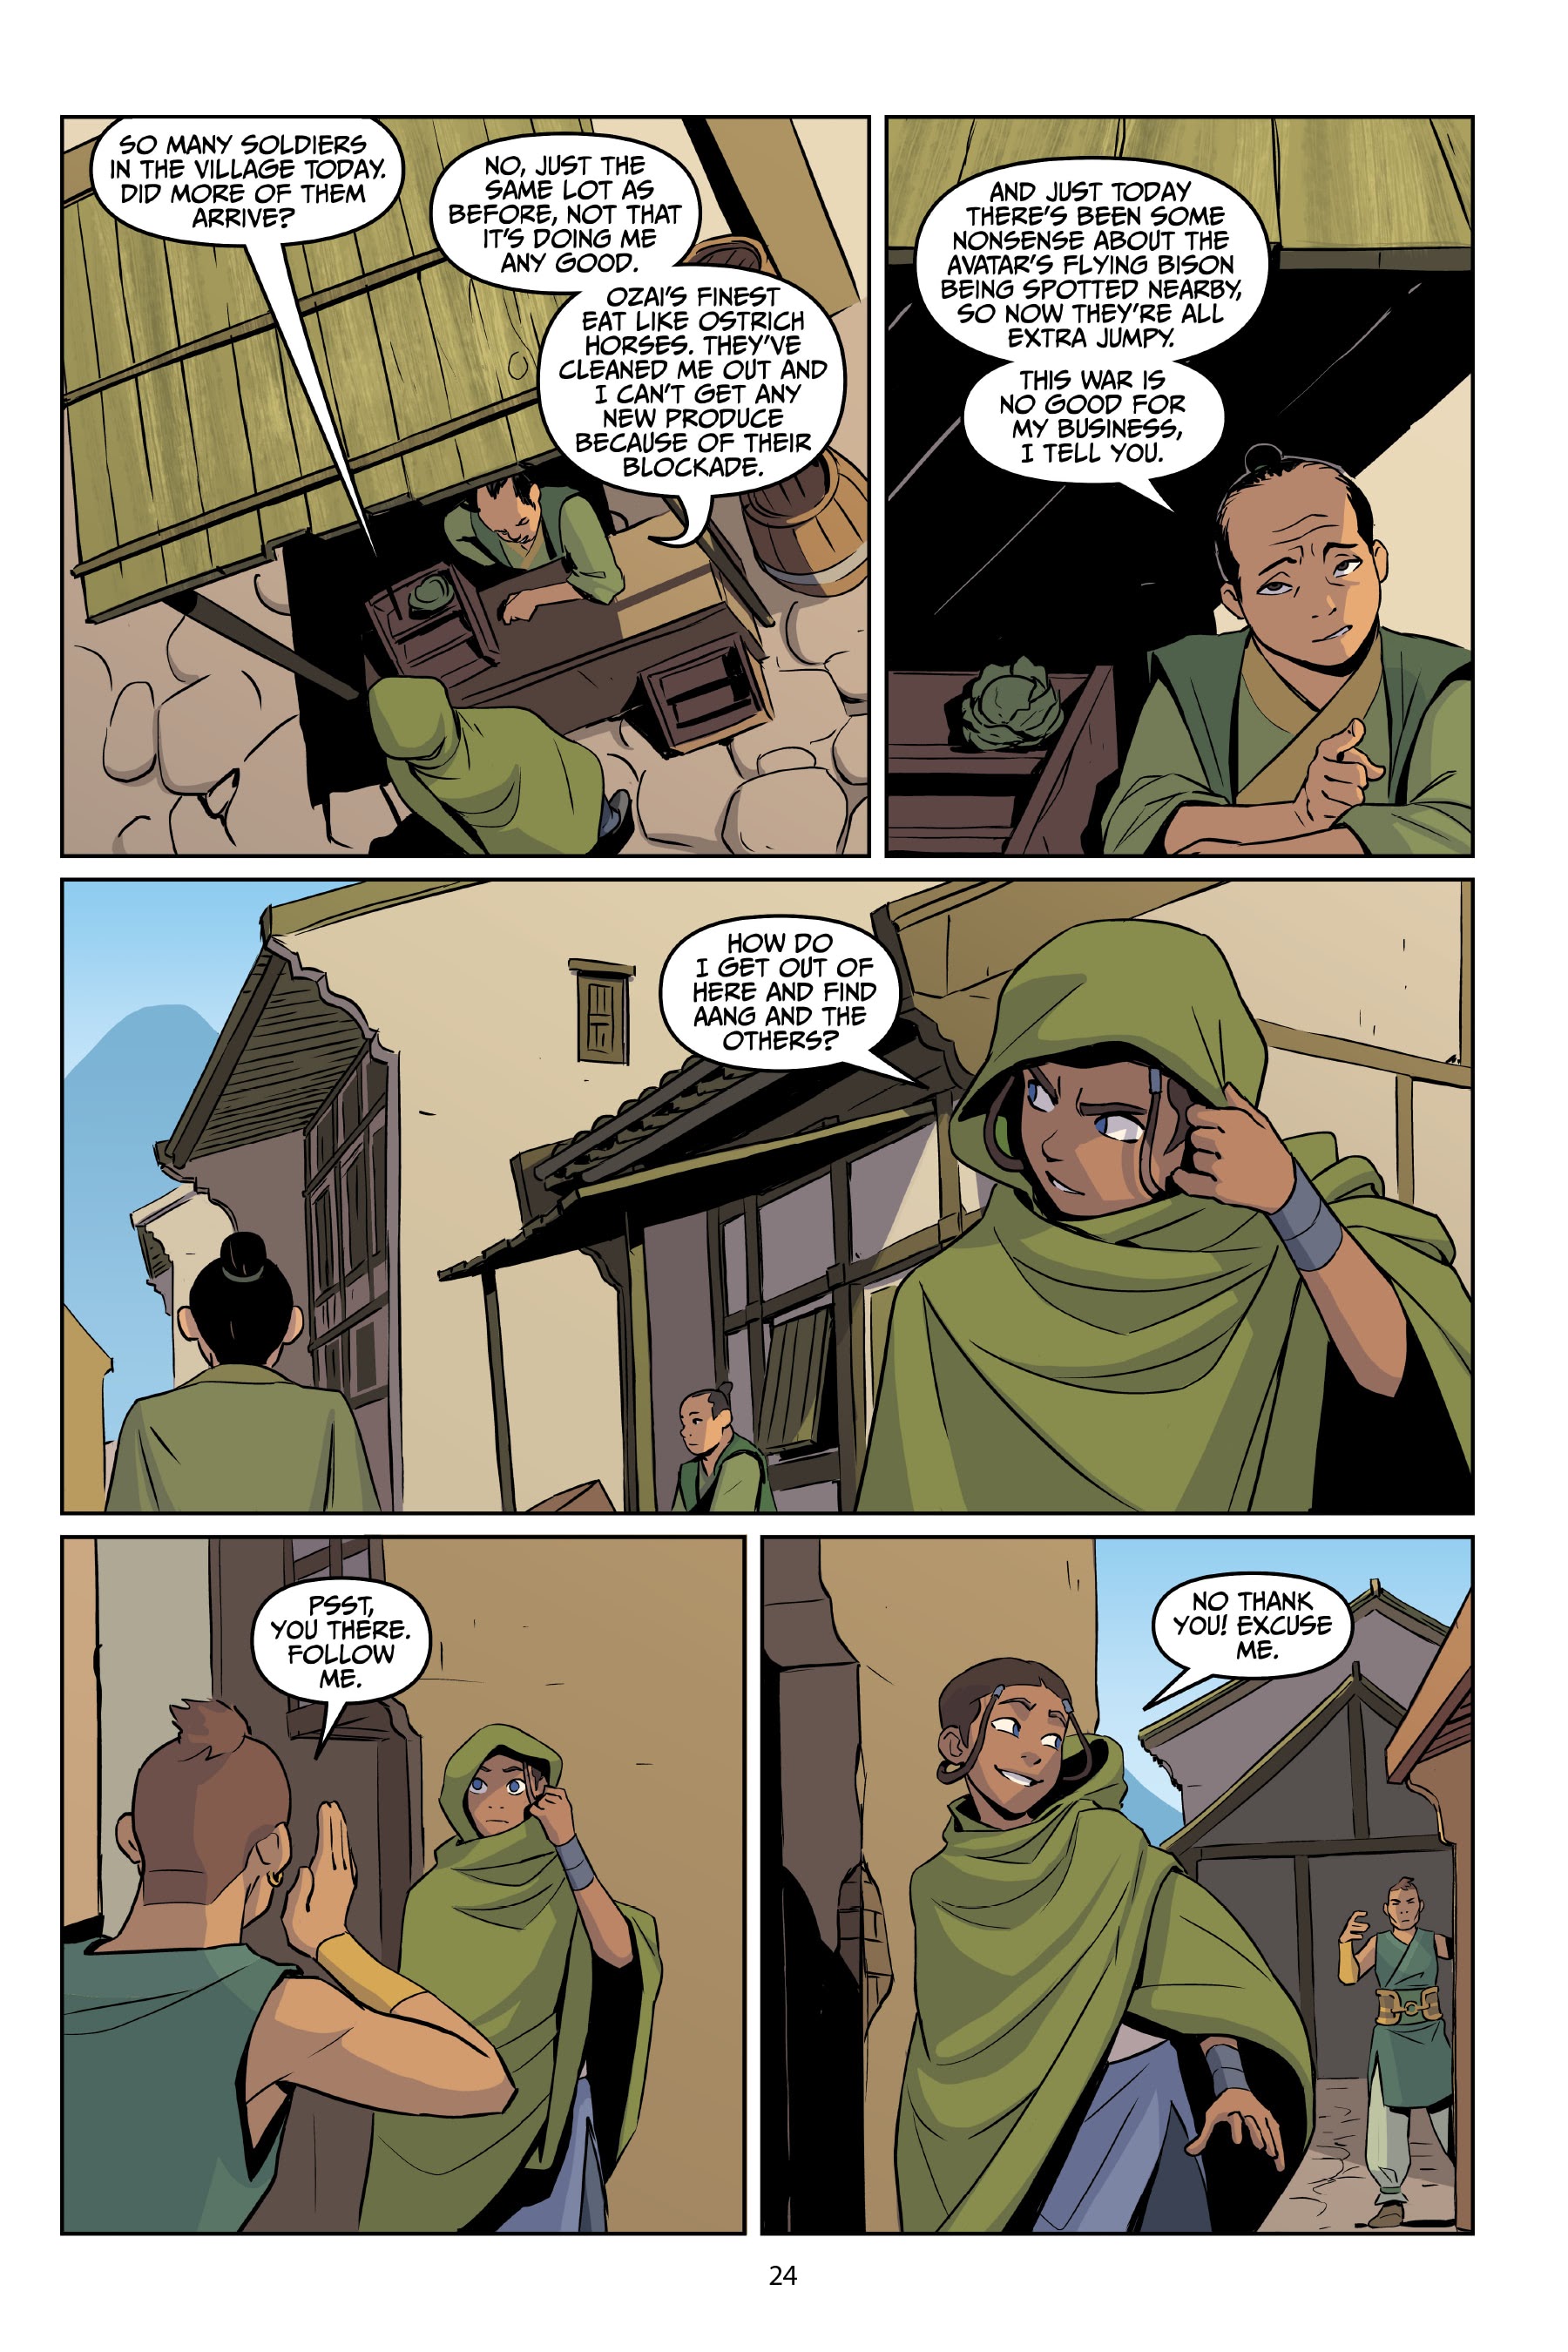 Read online Avatar: The Last Airbender—Katara and the Pirate's Silver comic -  Issue # TPB - 25